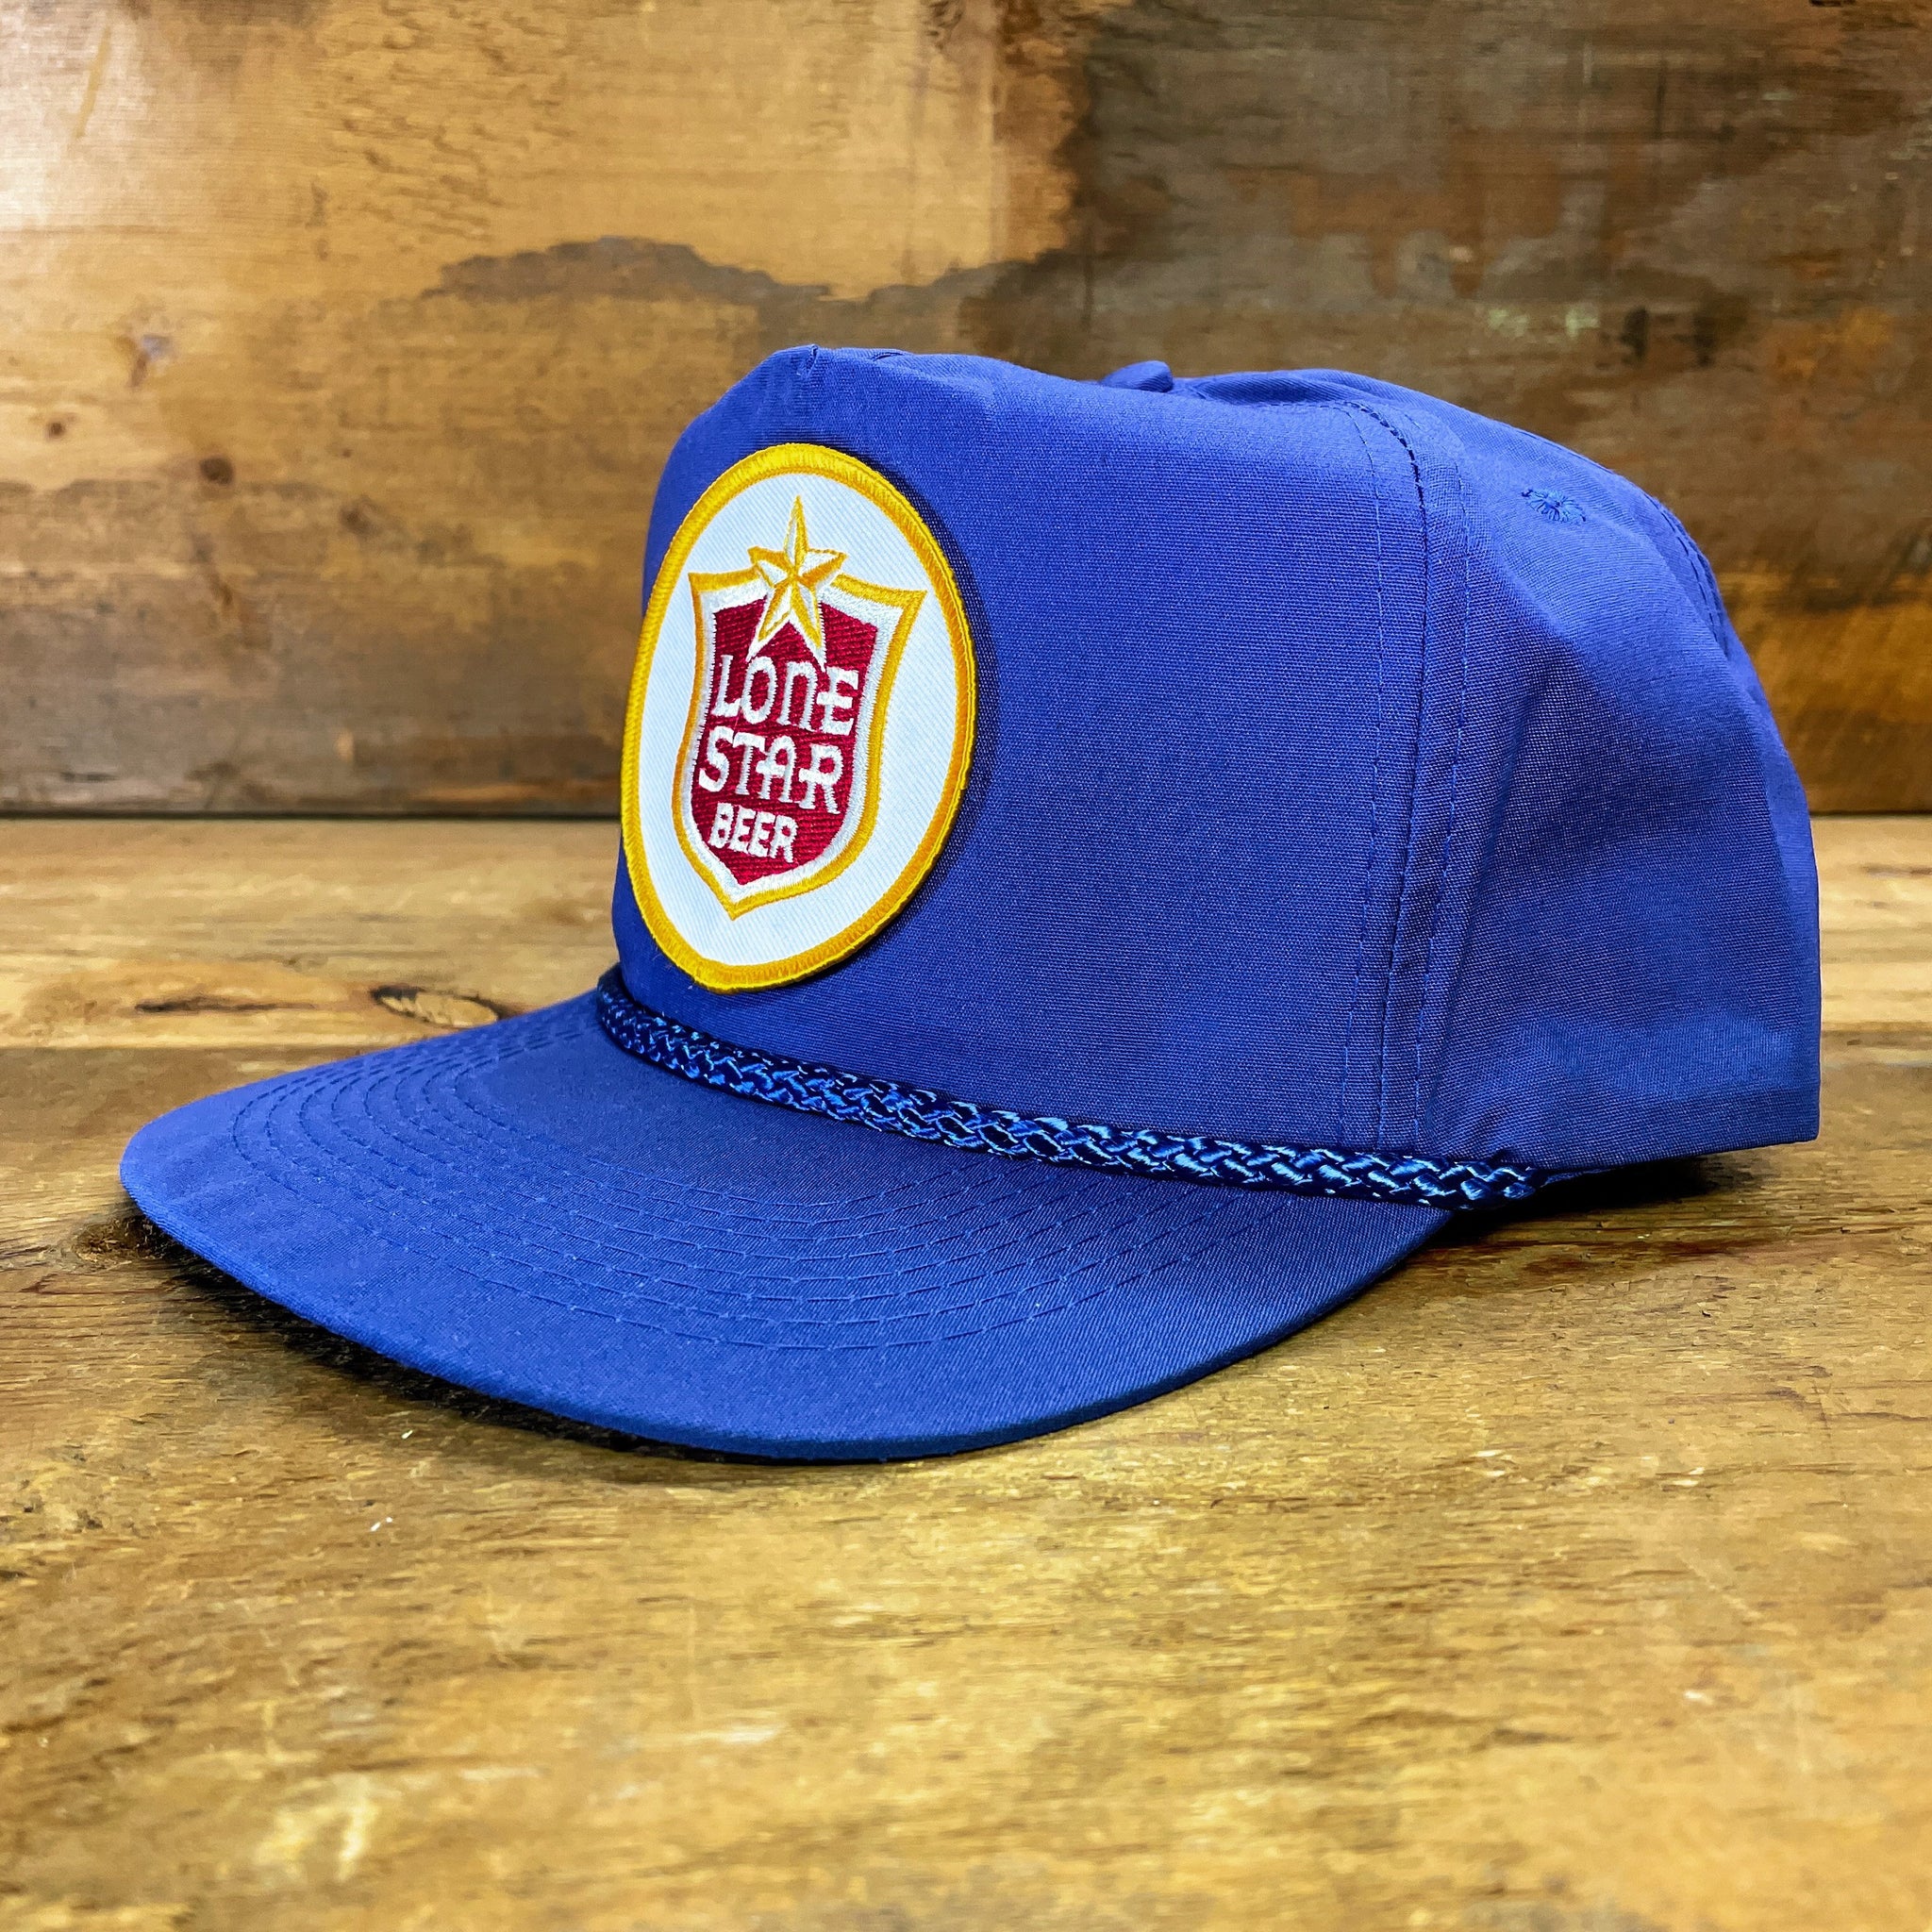 Leather Patch Hat — Blue Stars